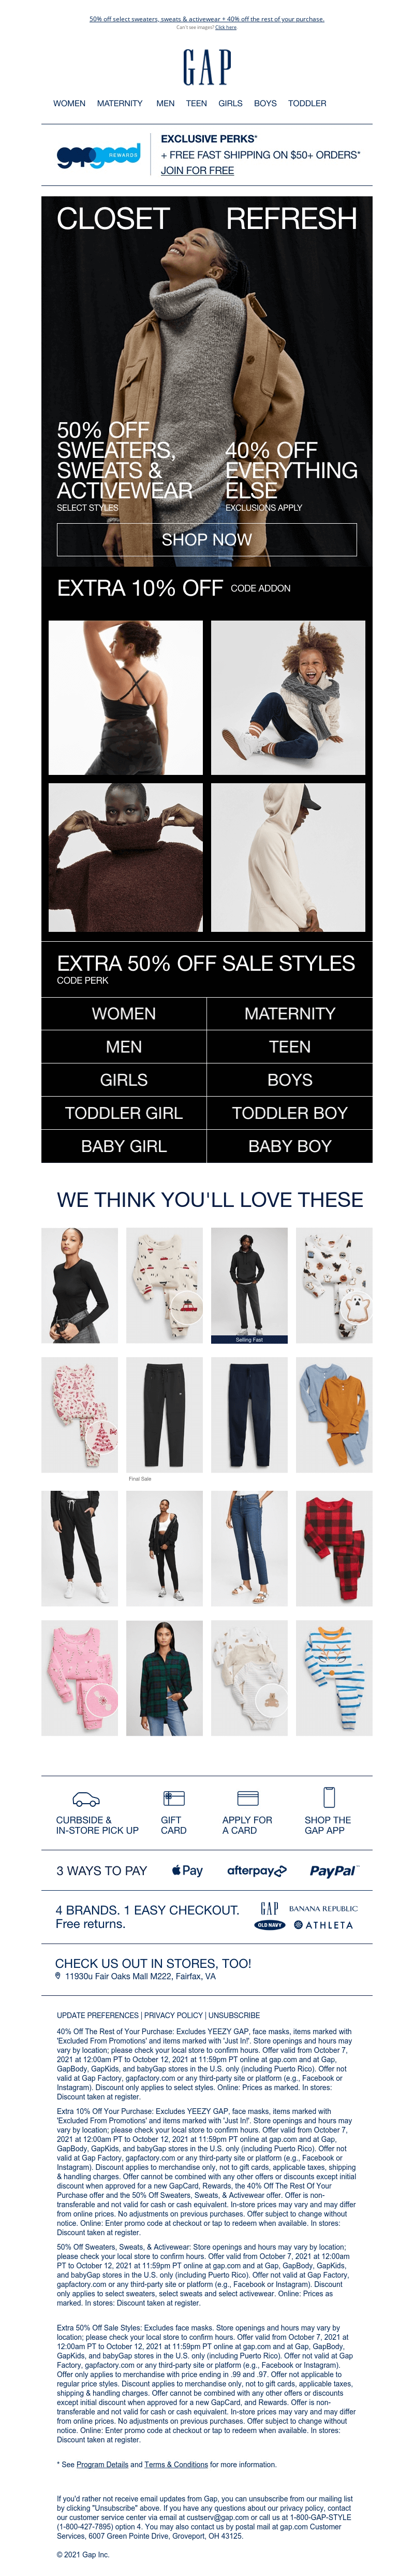 GAP email example